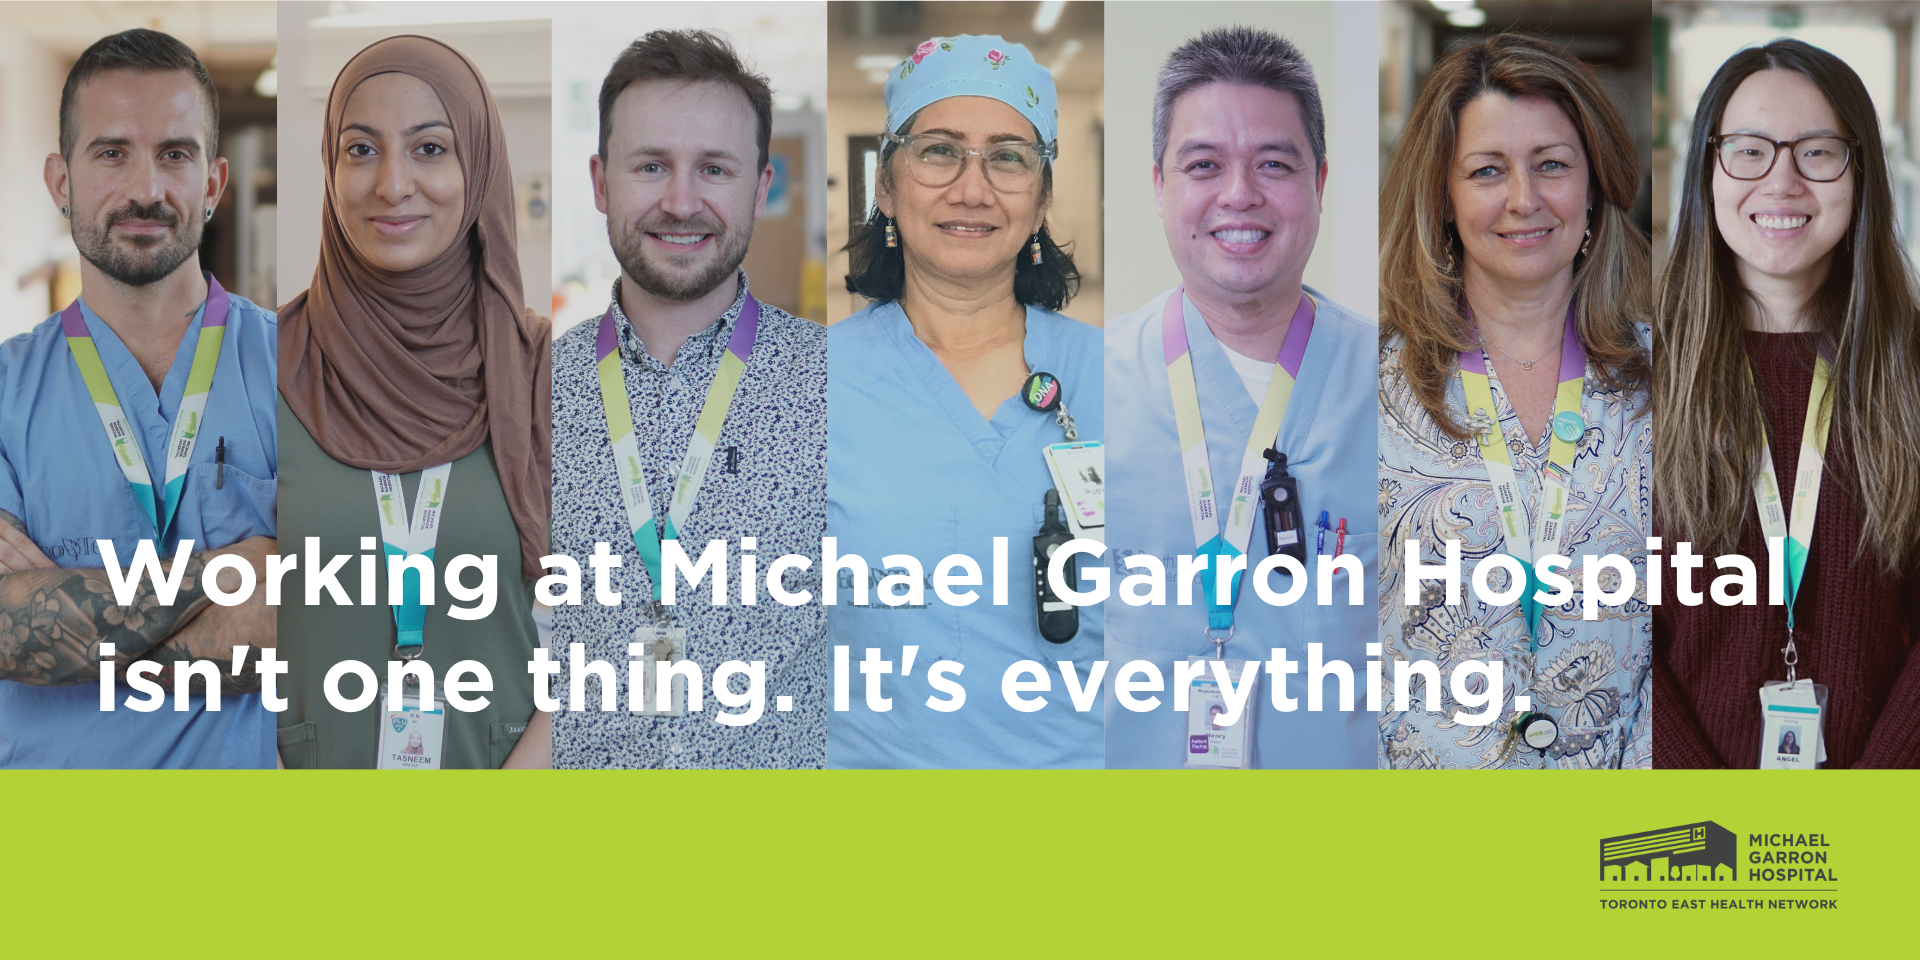 Banner depicting seven nurses with the tagline "Working at Michael Garron Hospital isn't one thing. It's everything."